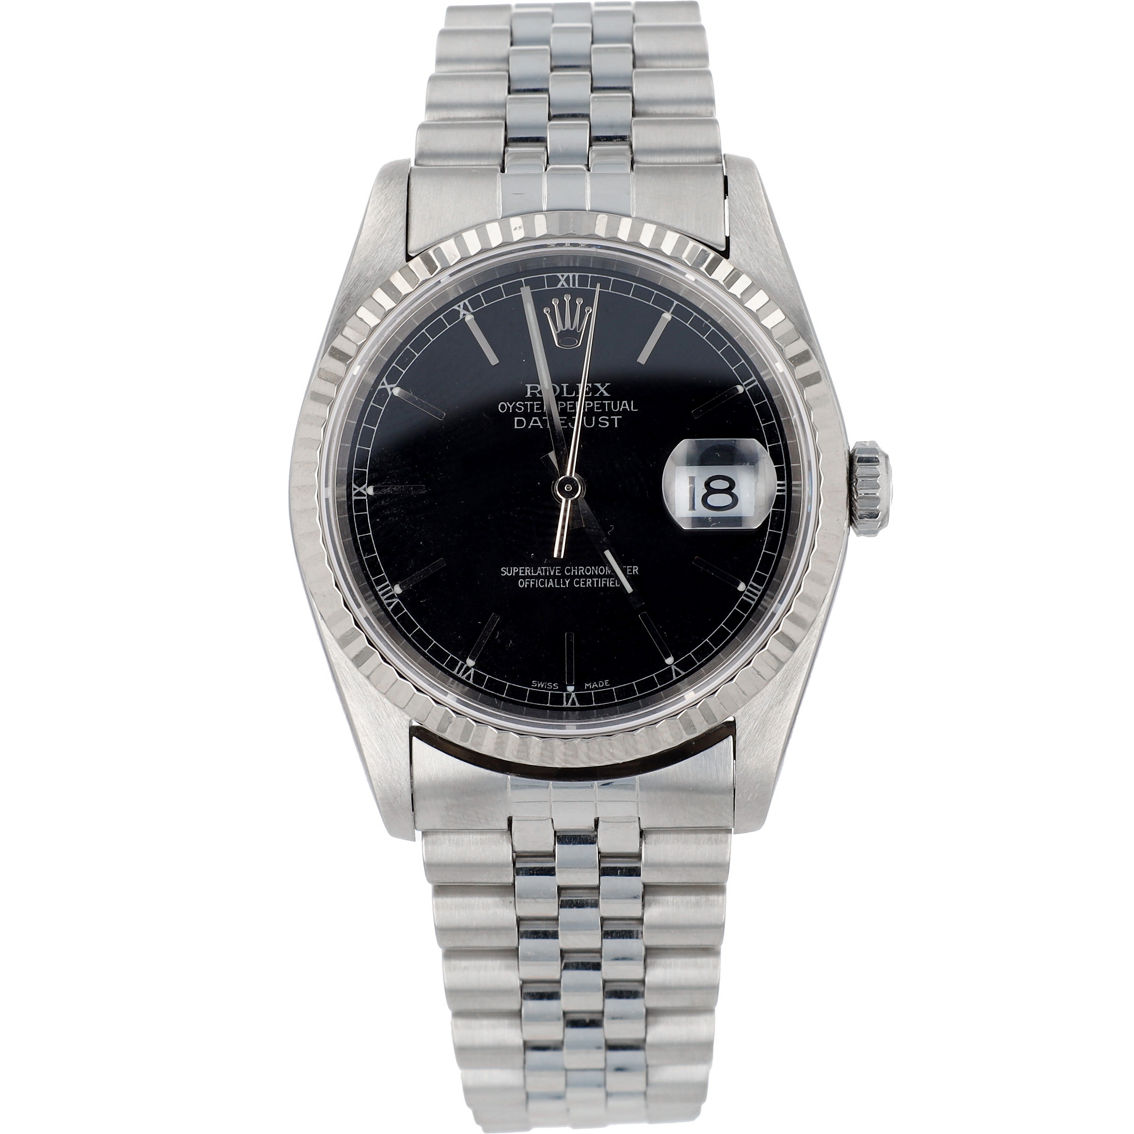 Rolex Men's Datejust Watch WLROLEX:OE88 (Pre-Owned) - Image 1 of 5